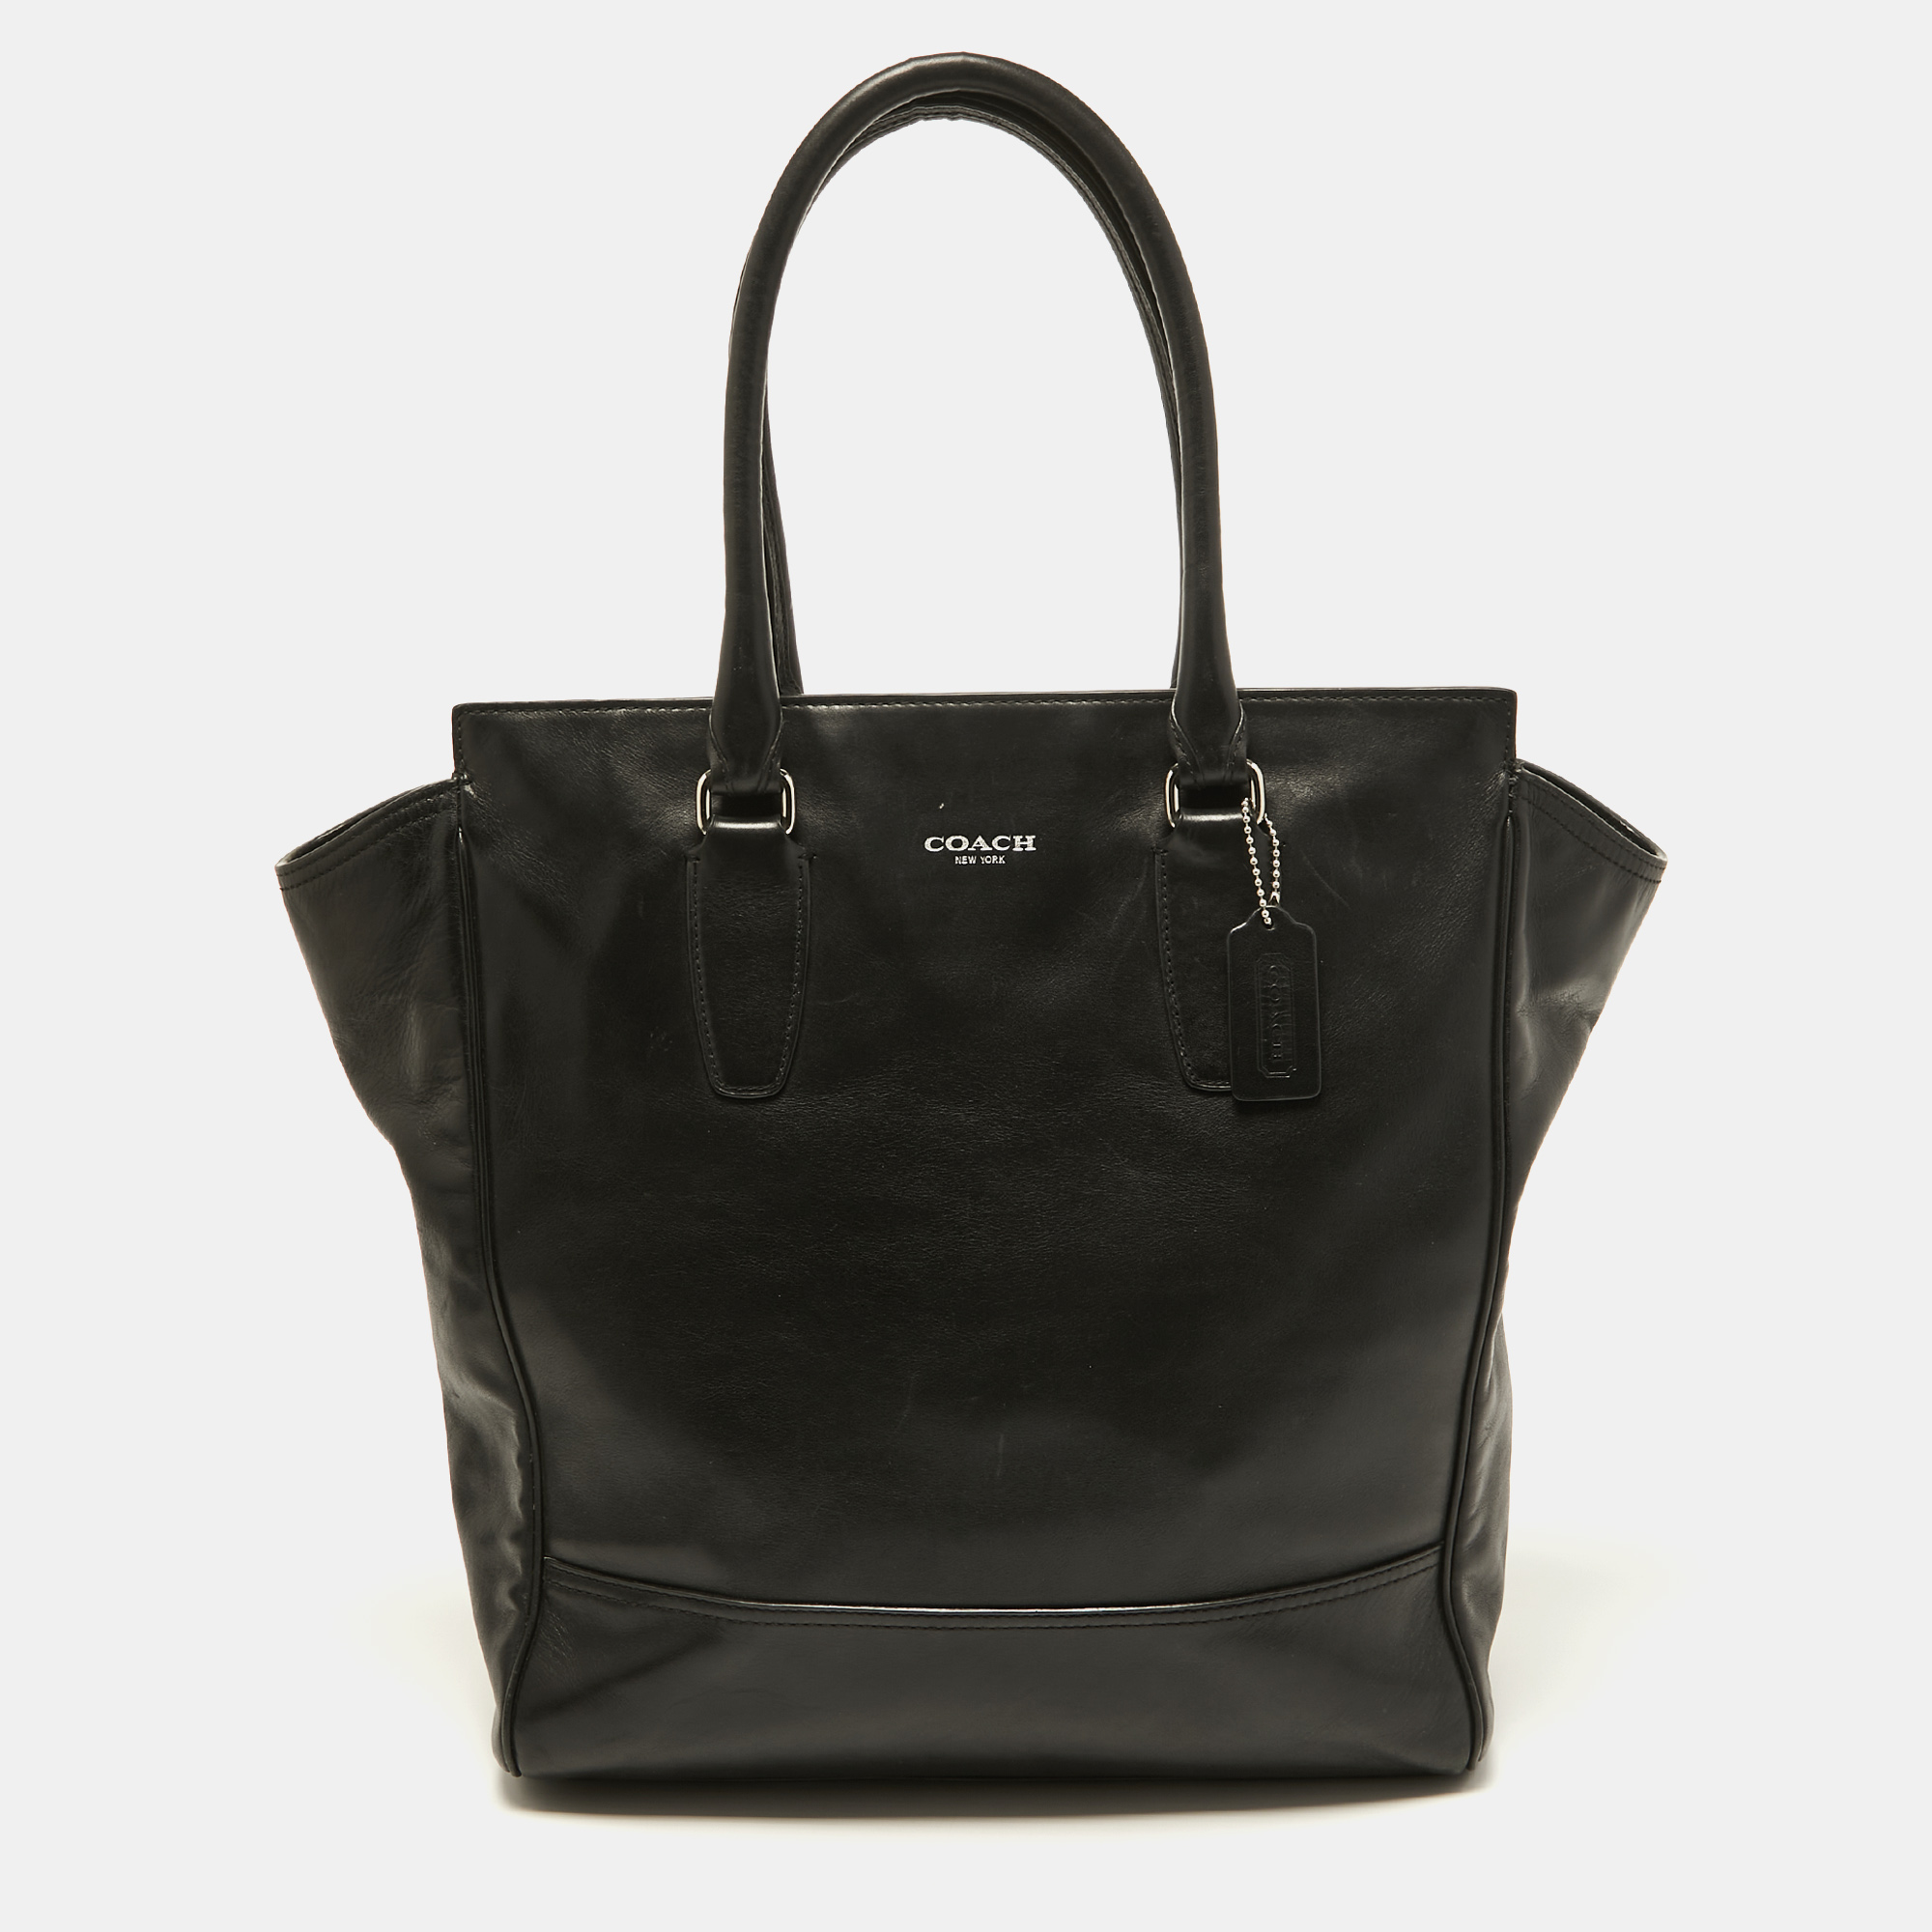 Pre-owned Coach Black Leather Tanner Tote